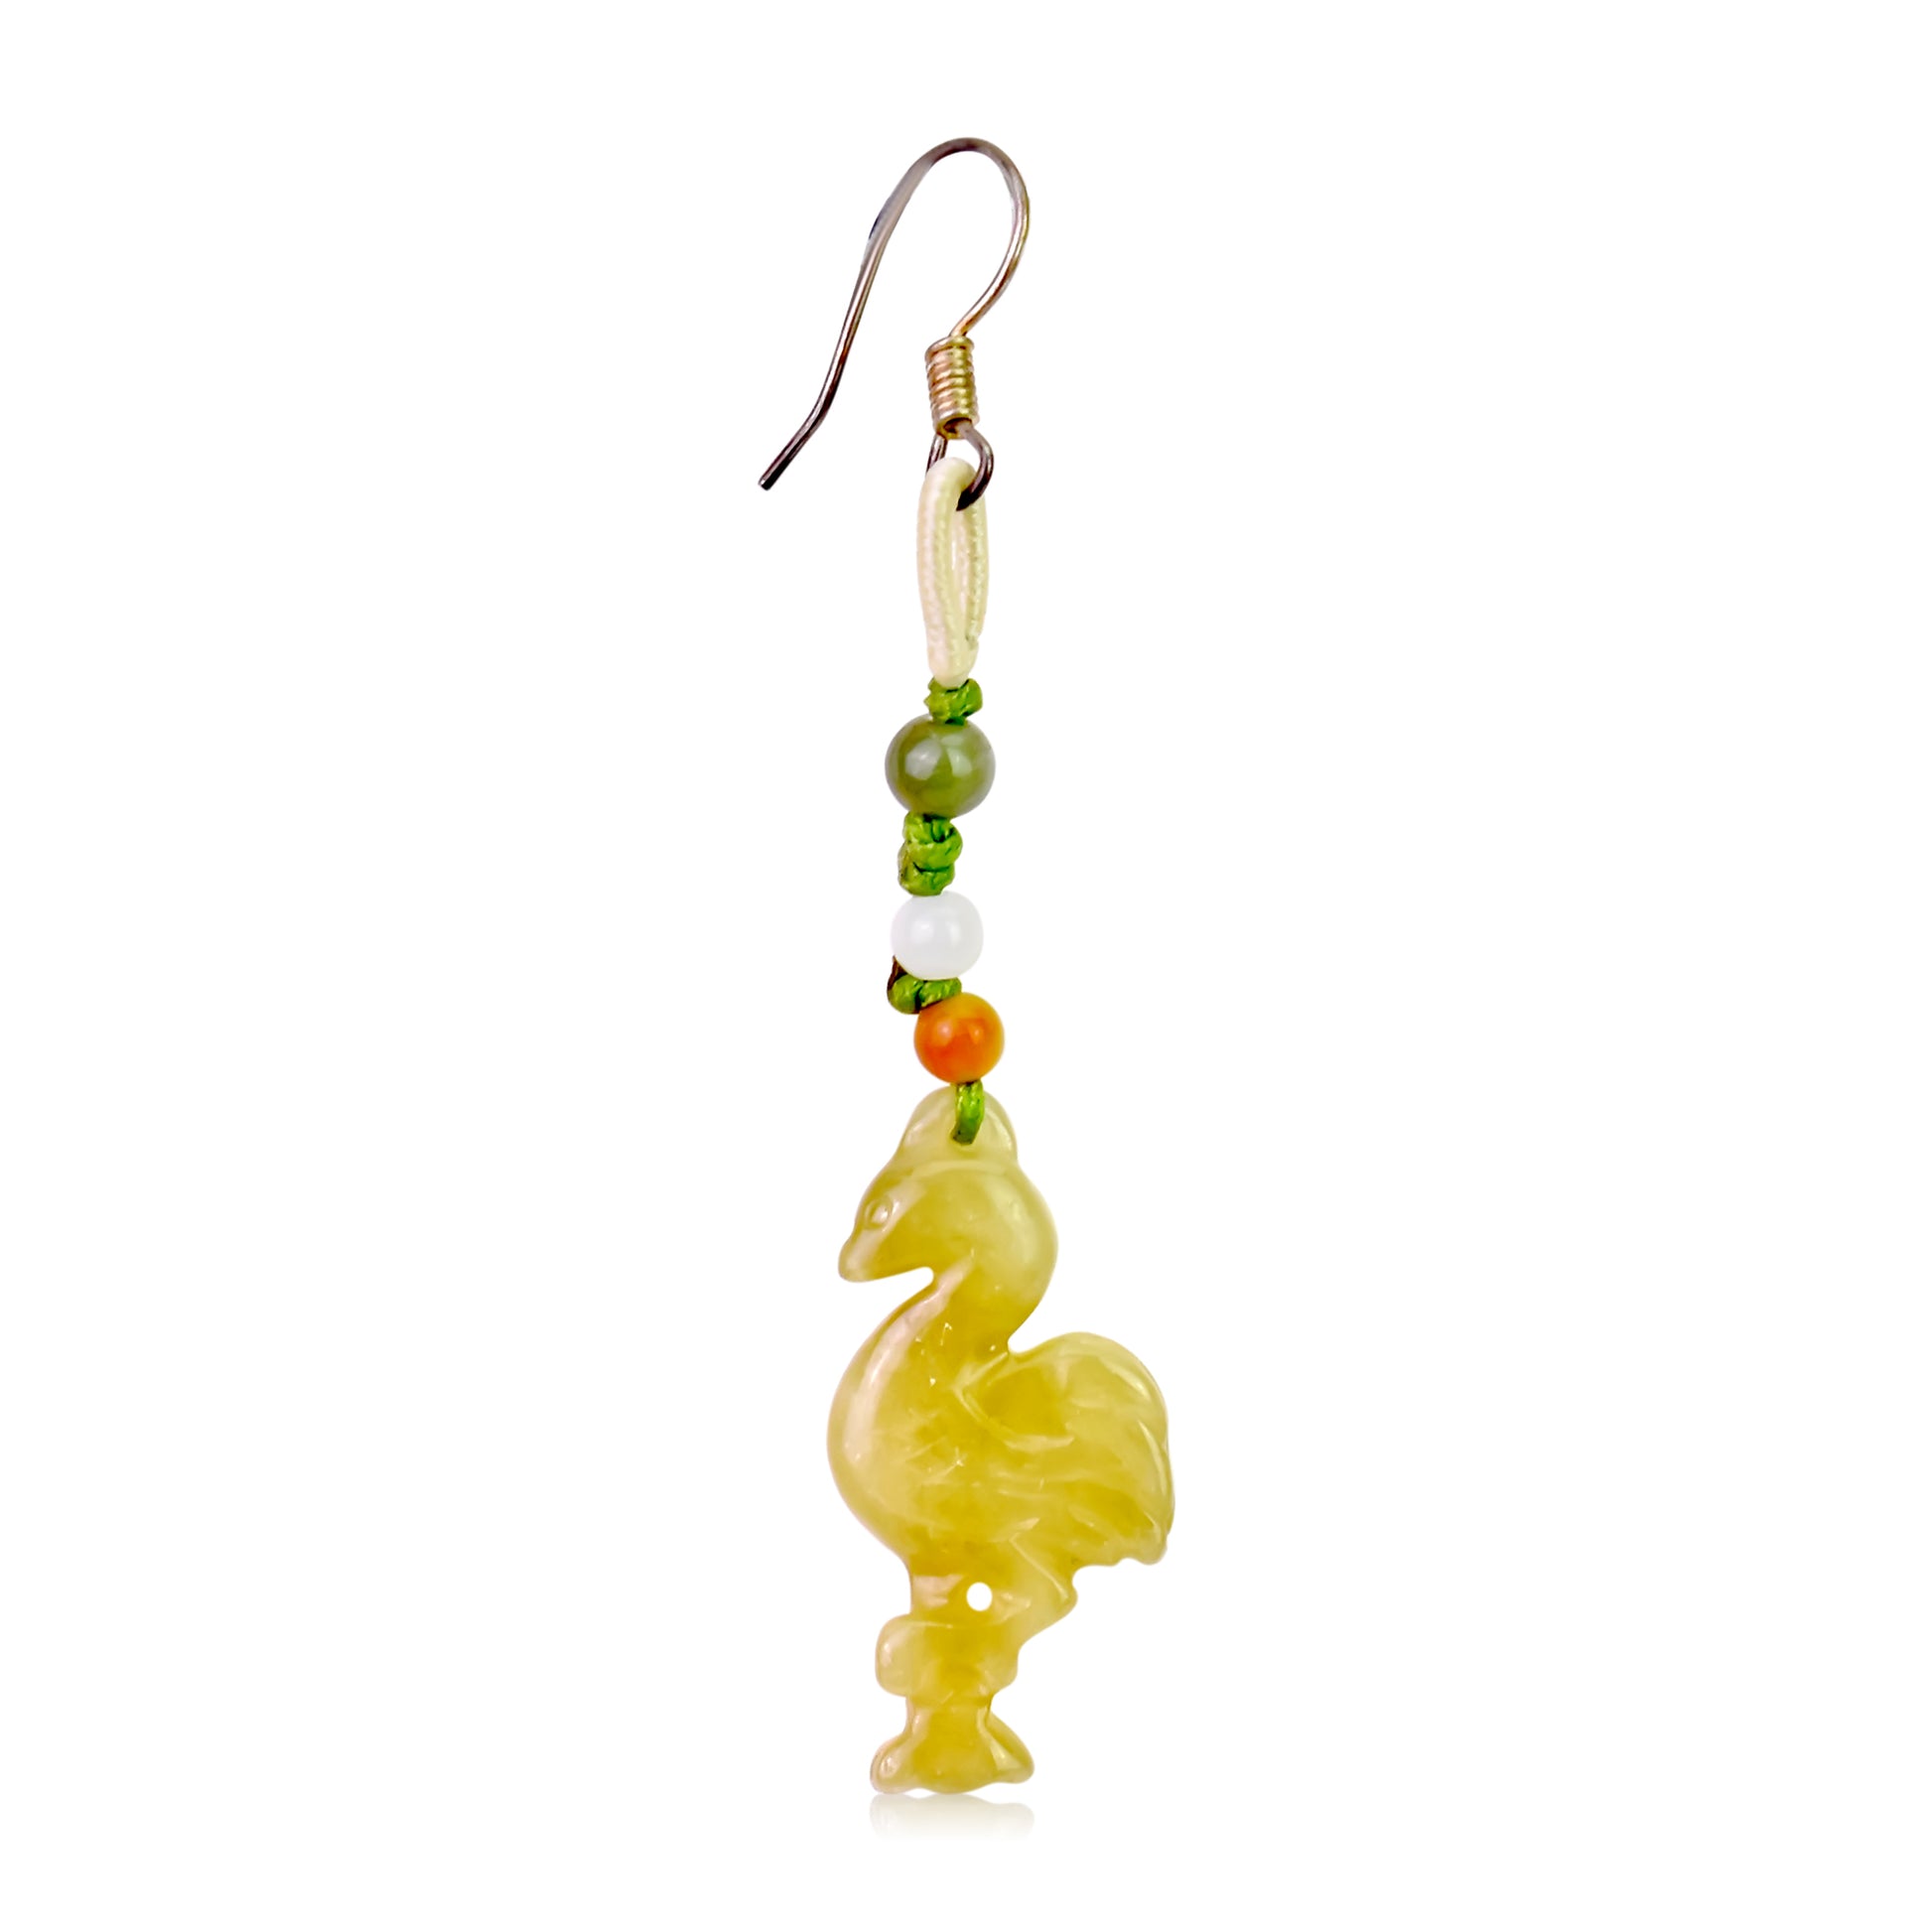 Feel Unique and Beautiful with Flamingo Handmade Jade Earrings made with Lime Cord